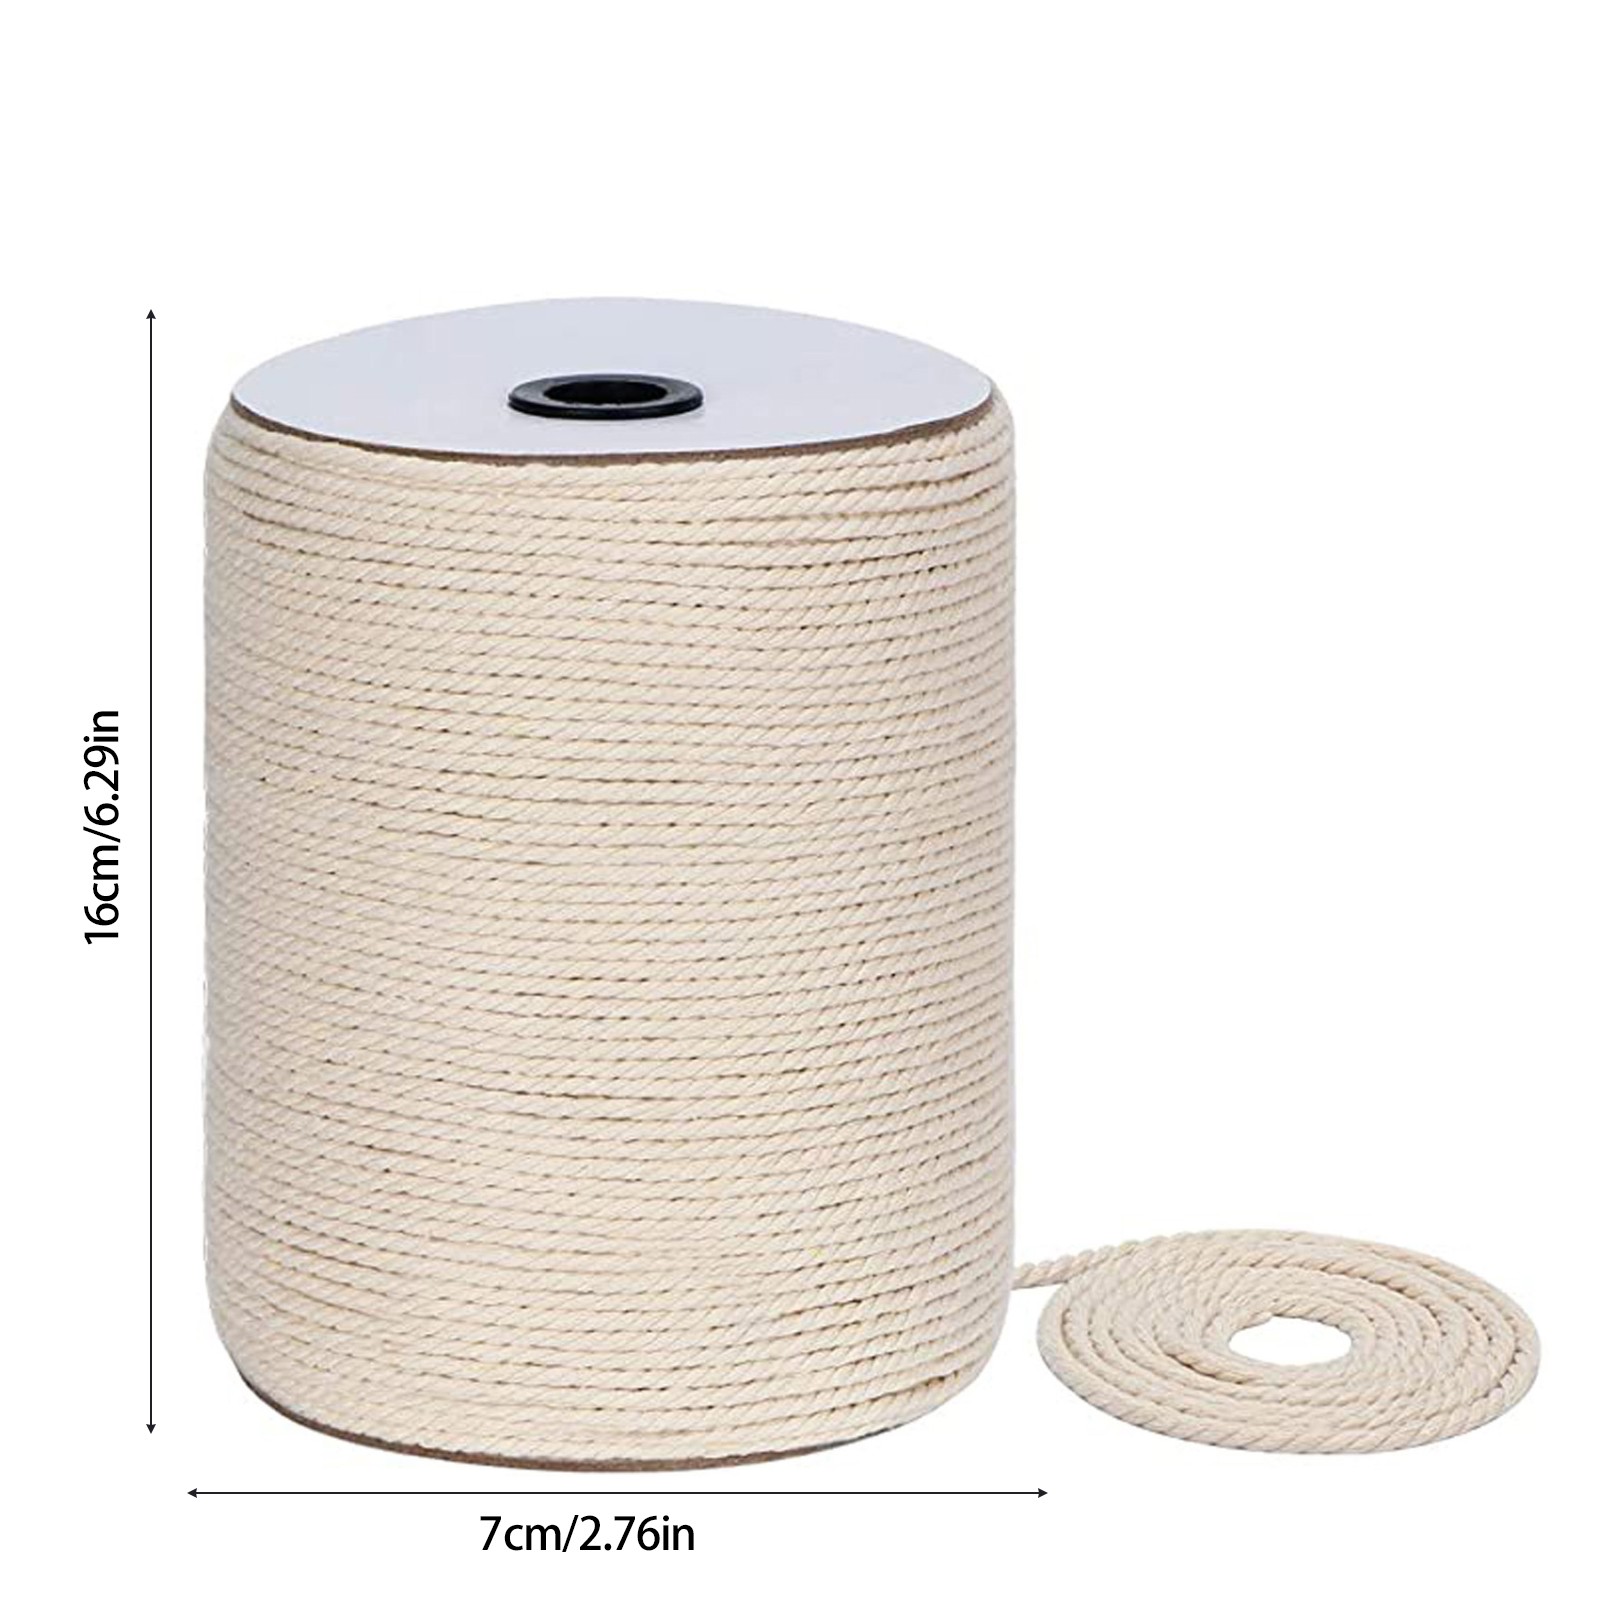 3mm x 300m Cotton Rope Multi-purpose Creative Diy Cotton Rope Strands Twisted Macrame Cotton Cord for Wall Hanging Crafts